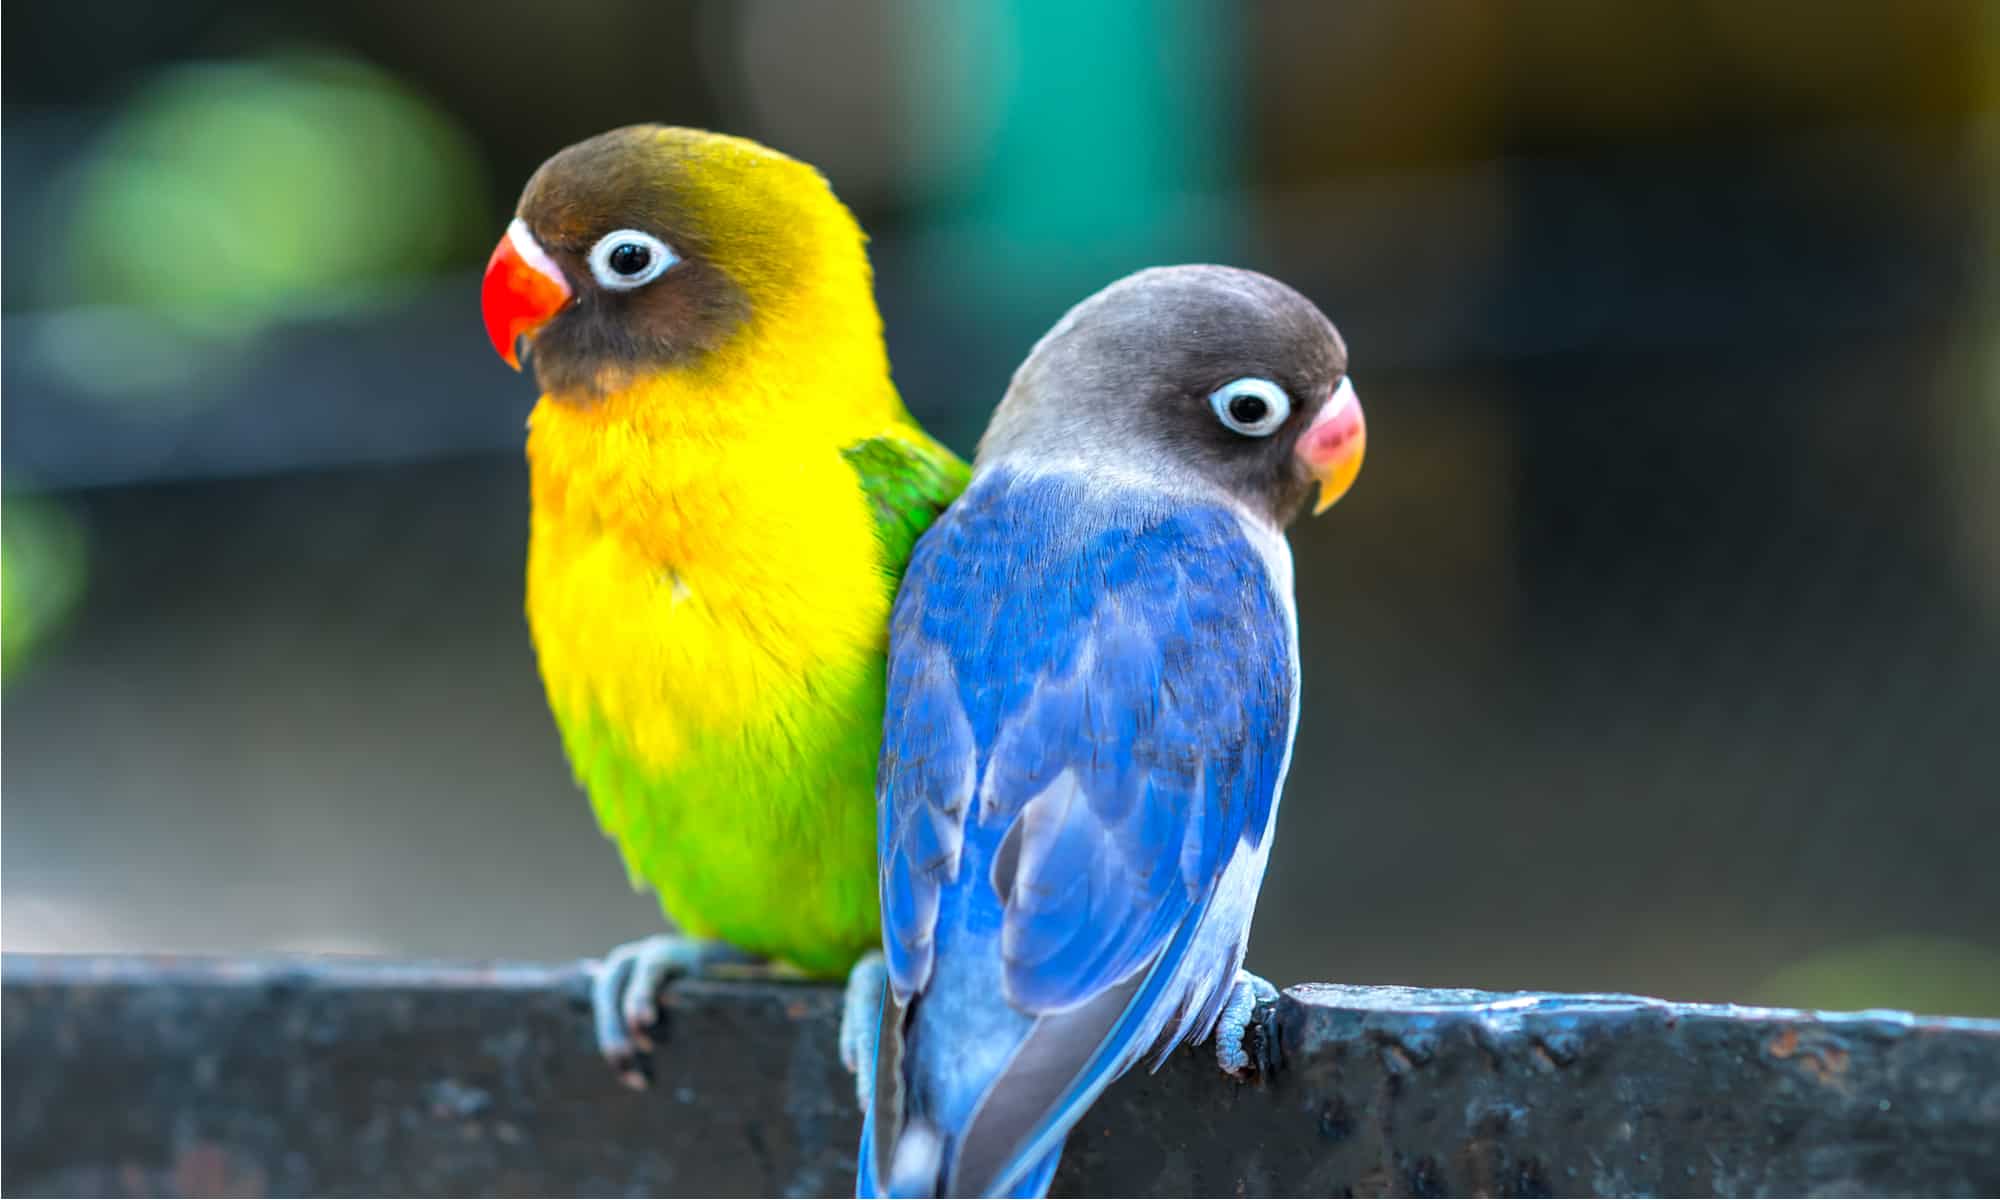 Two lovebirds sitting together on a fence.